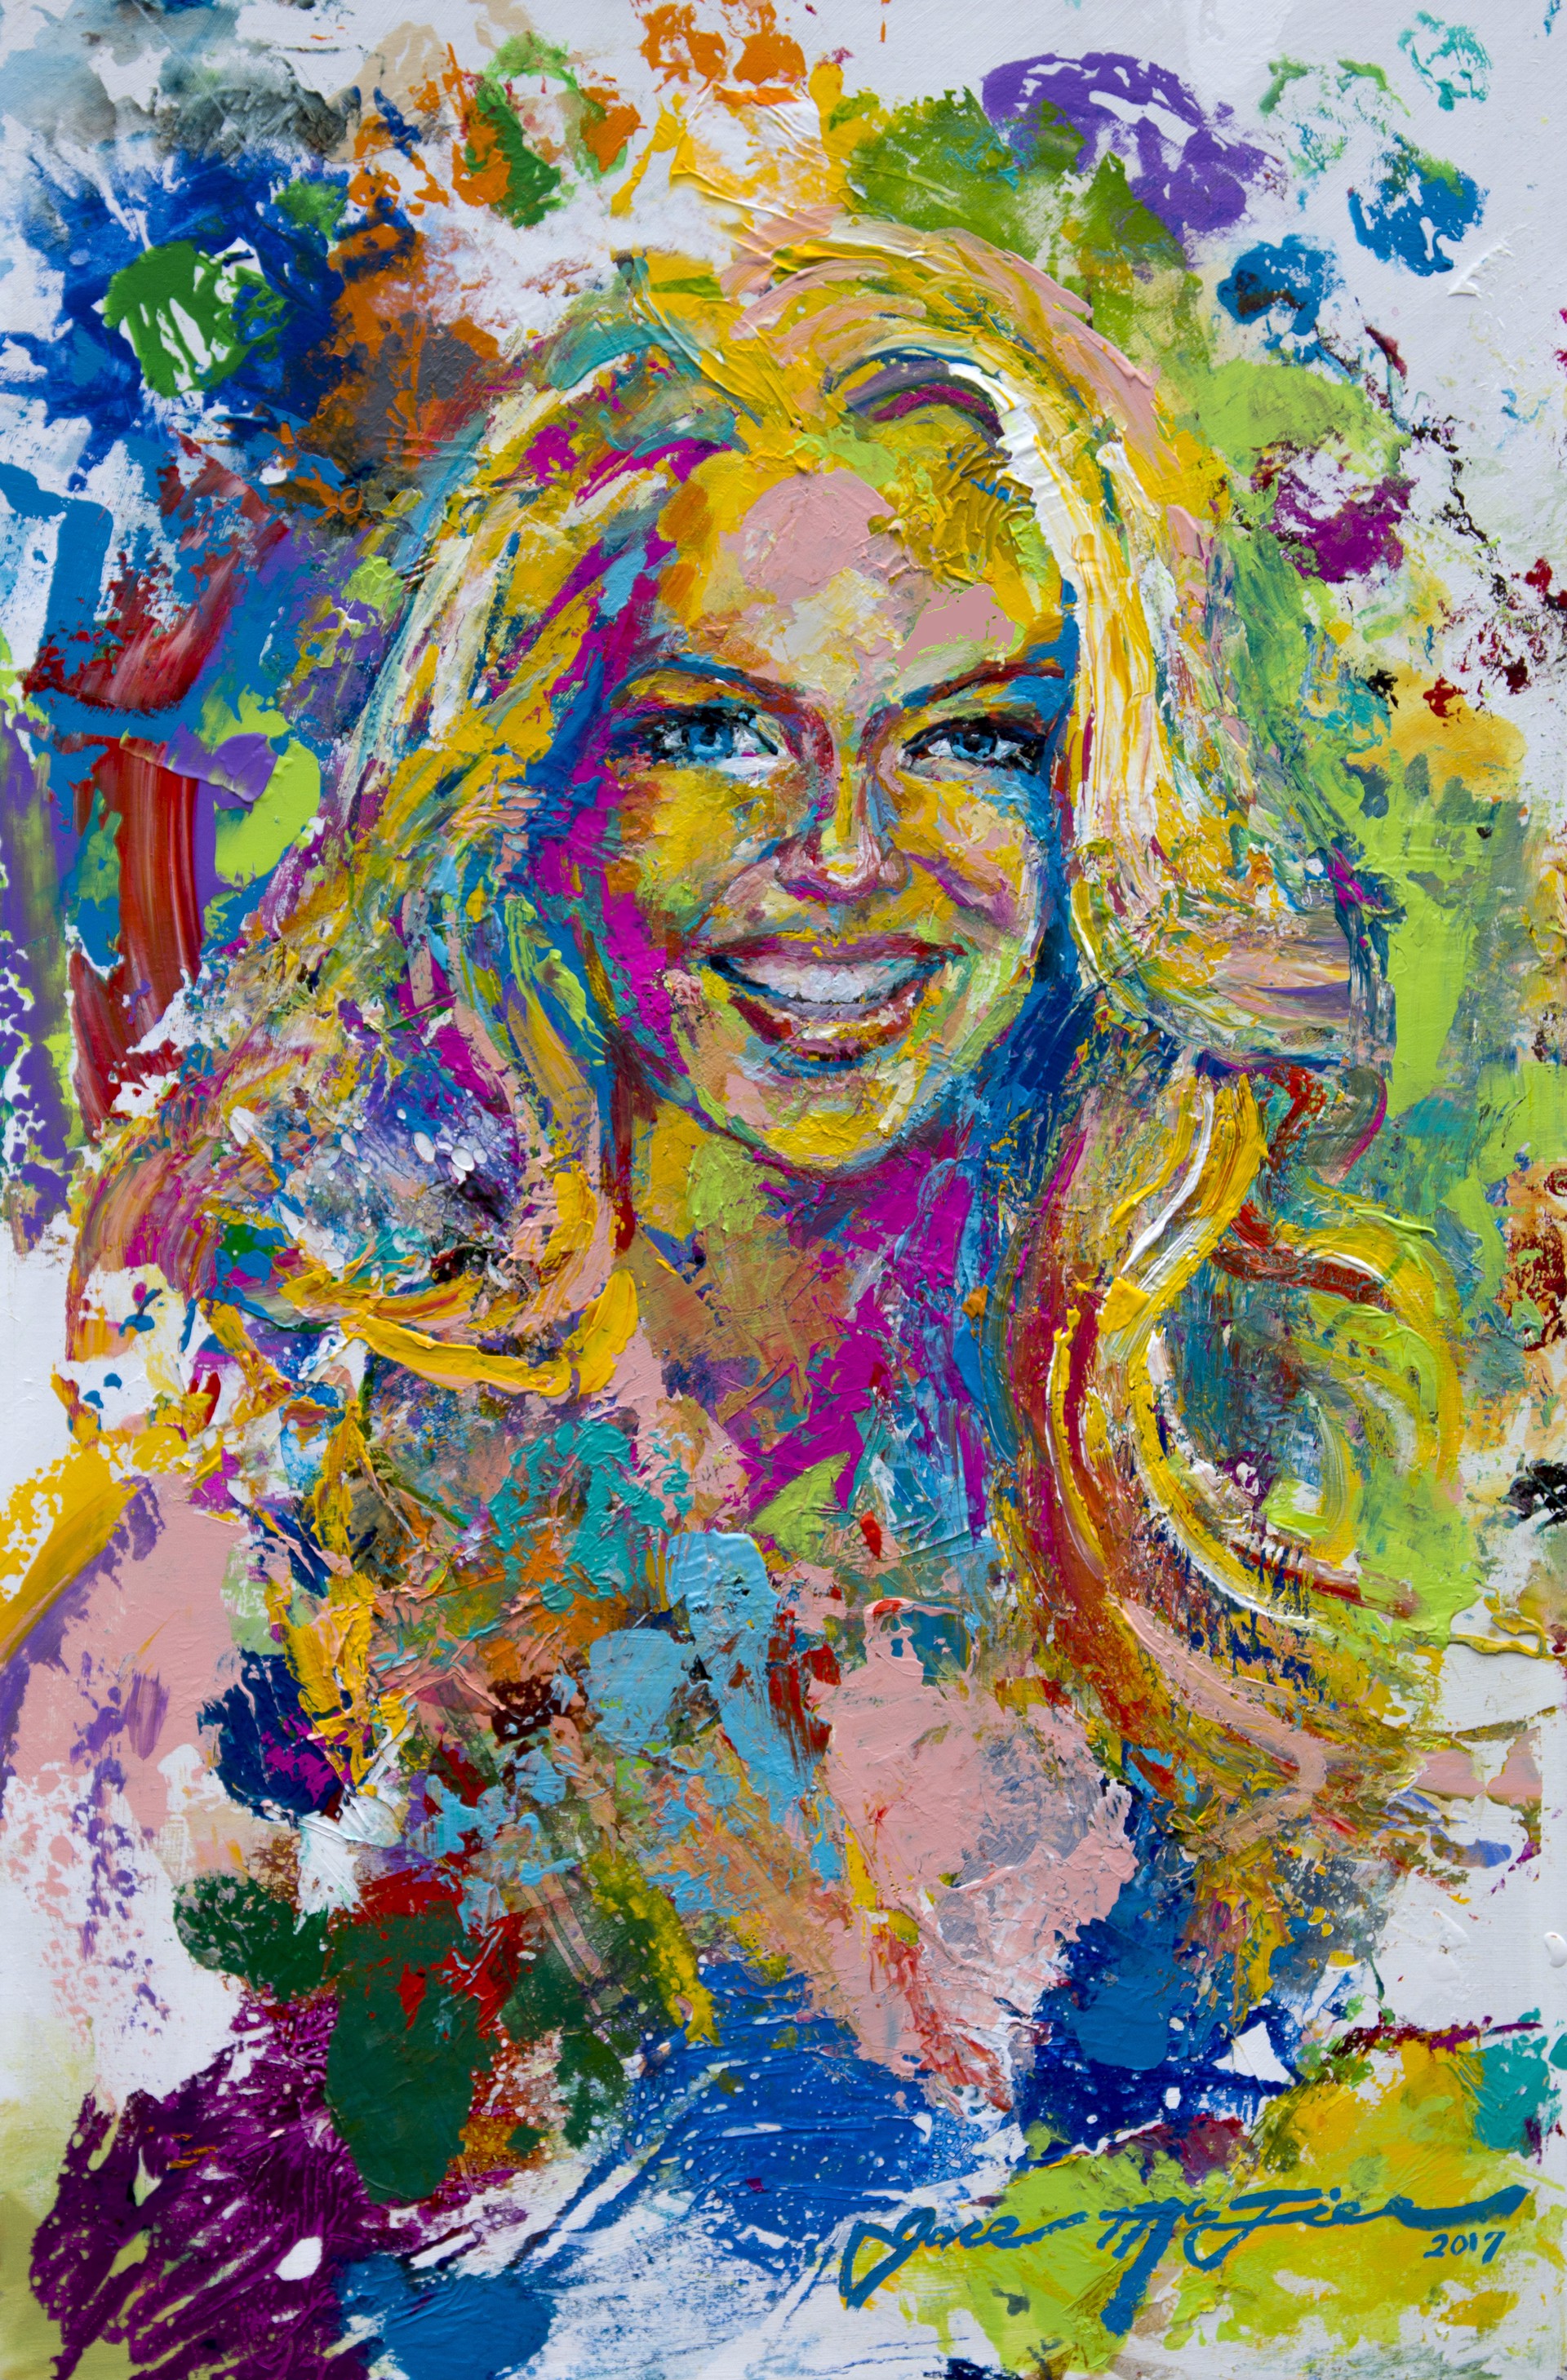 "Cheerful Charisma: Kate Upton's Smile" by Jace McTier